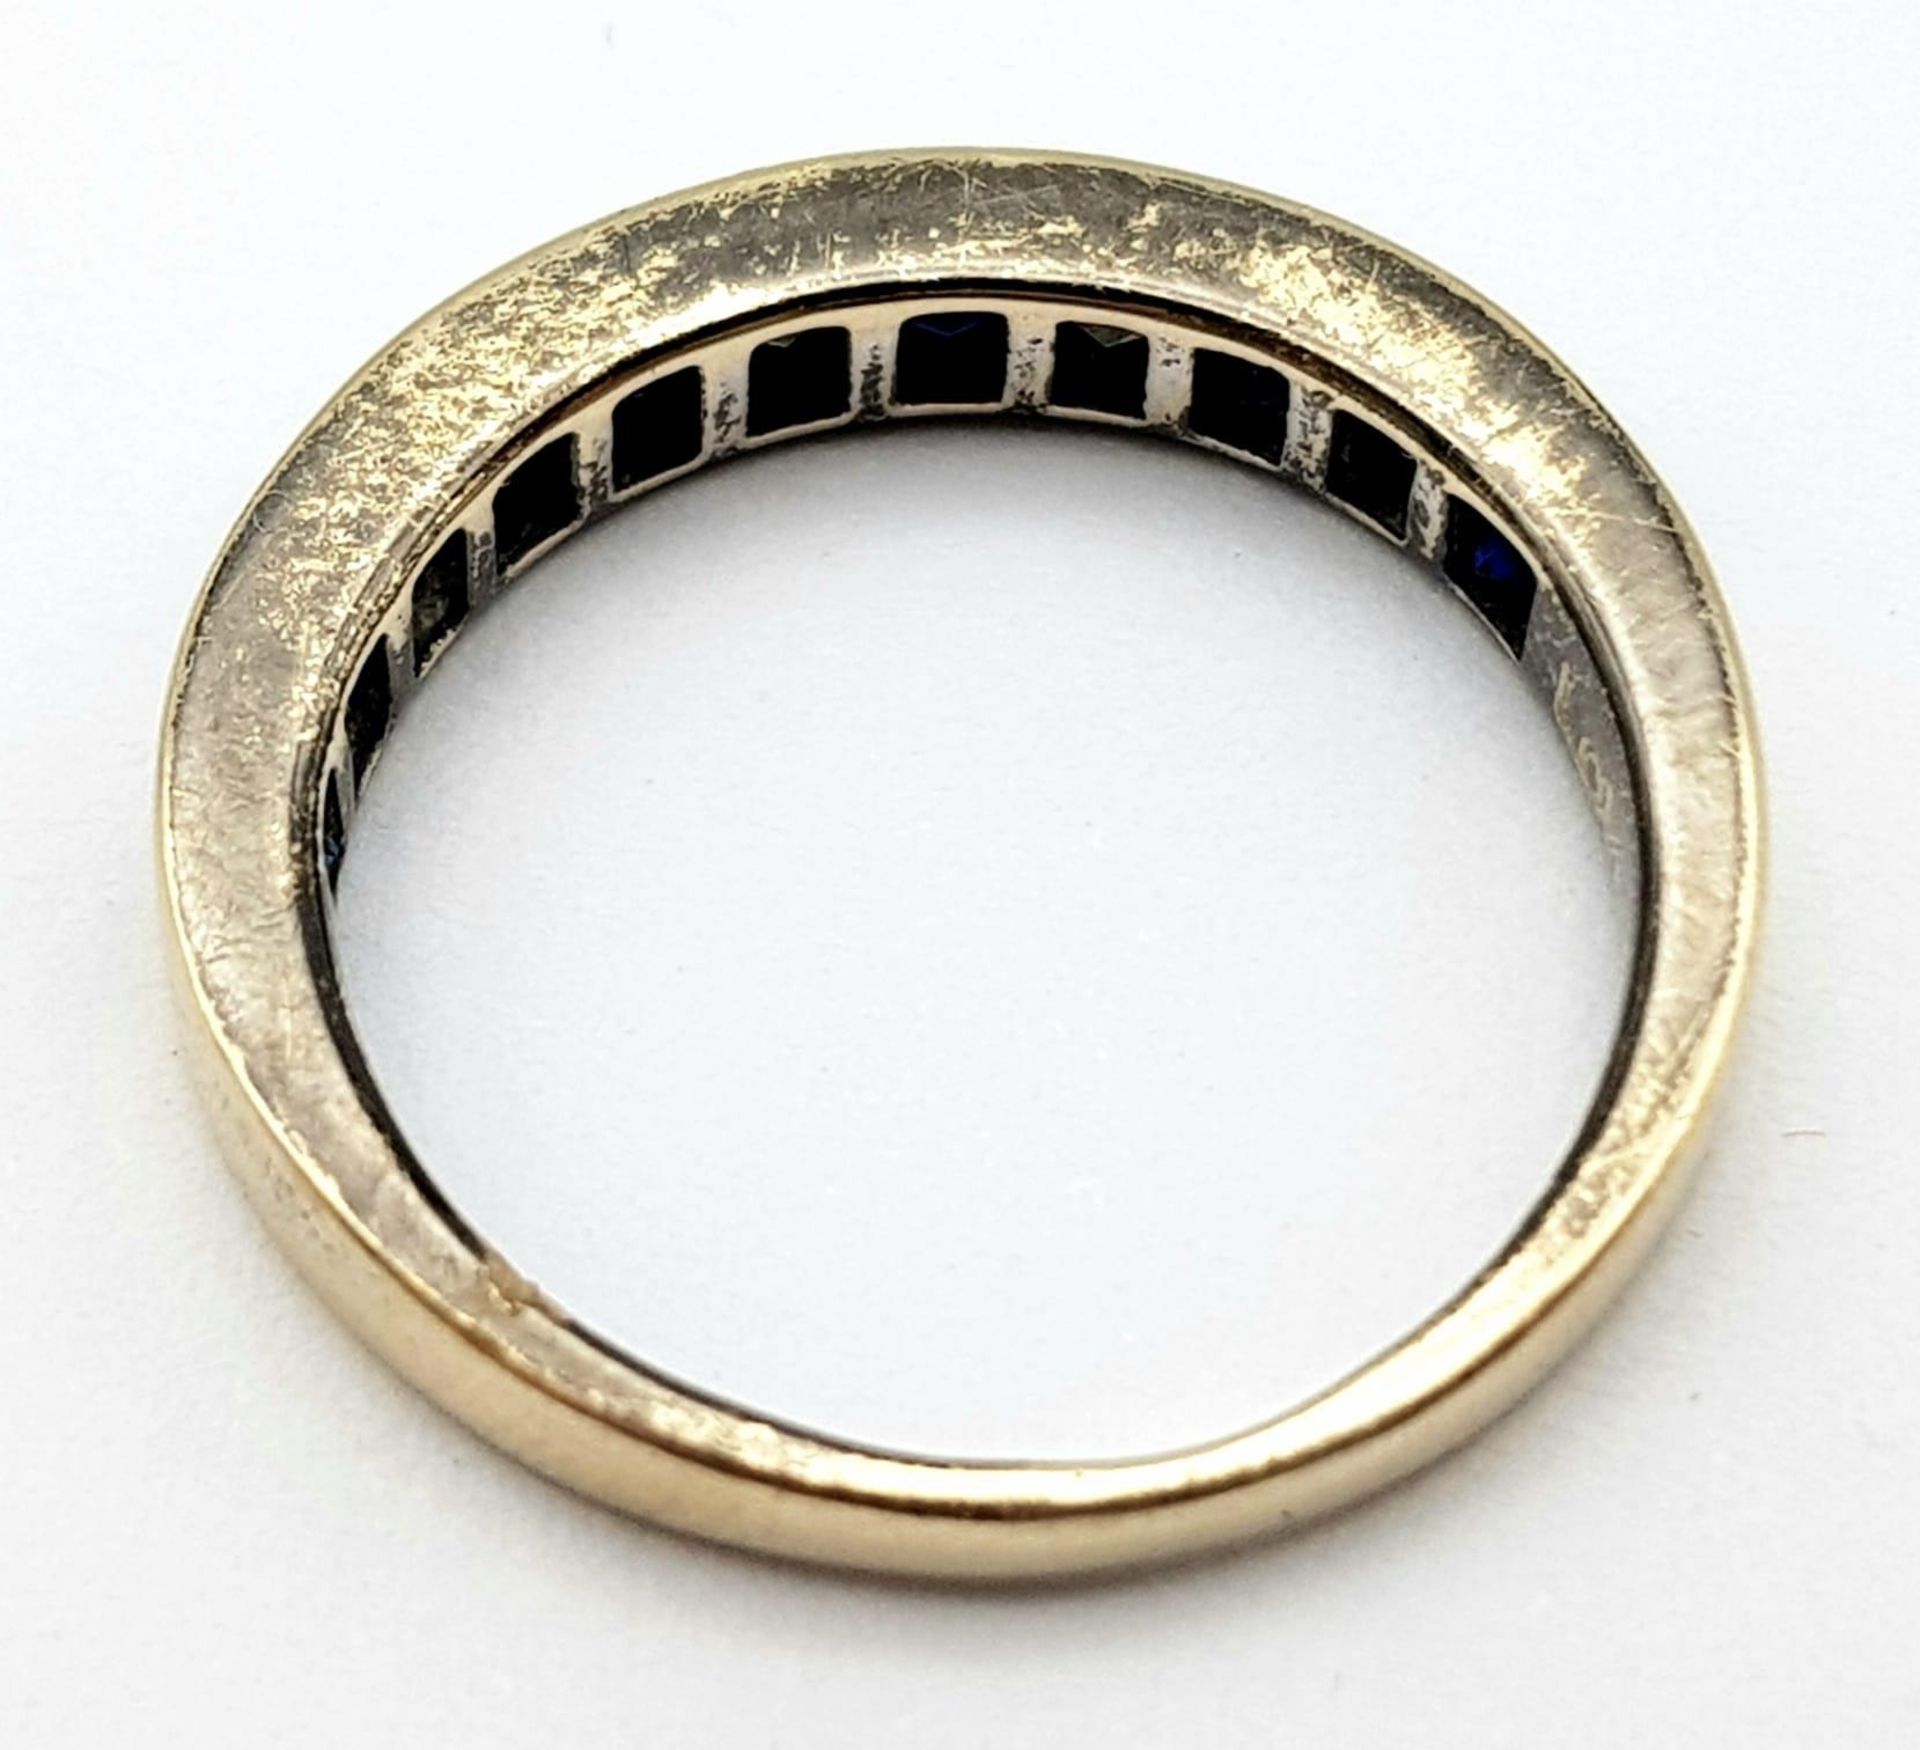 An 18K Gold Diamond and Sapphire Half-Eternity Ring. Size K. 3.1g total weight. Ref: 016637 - Image 4 of 5